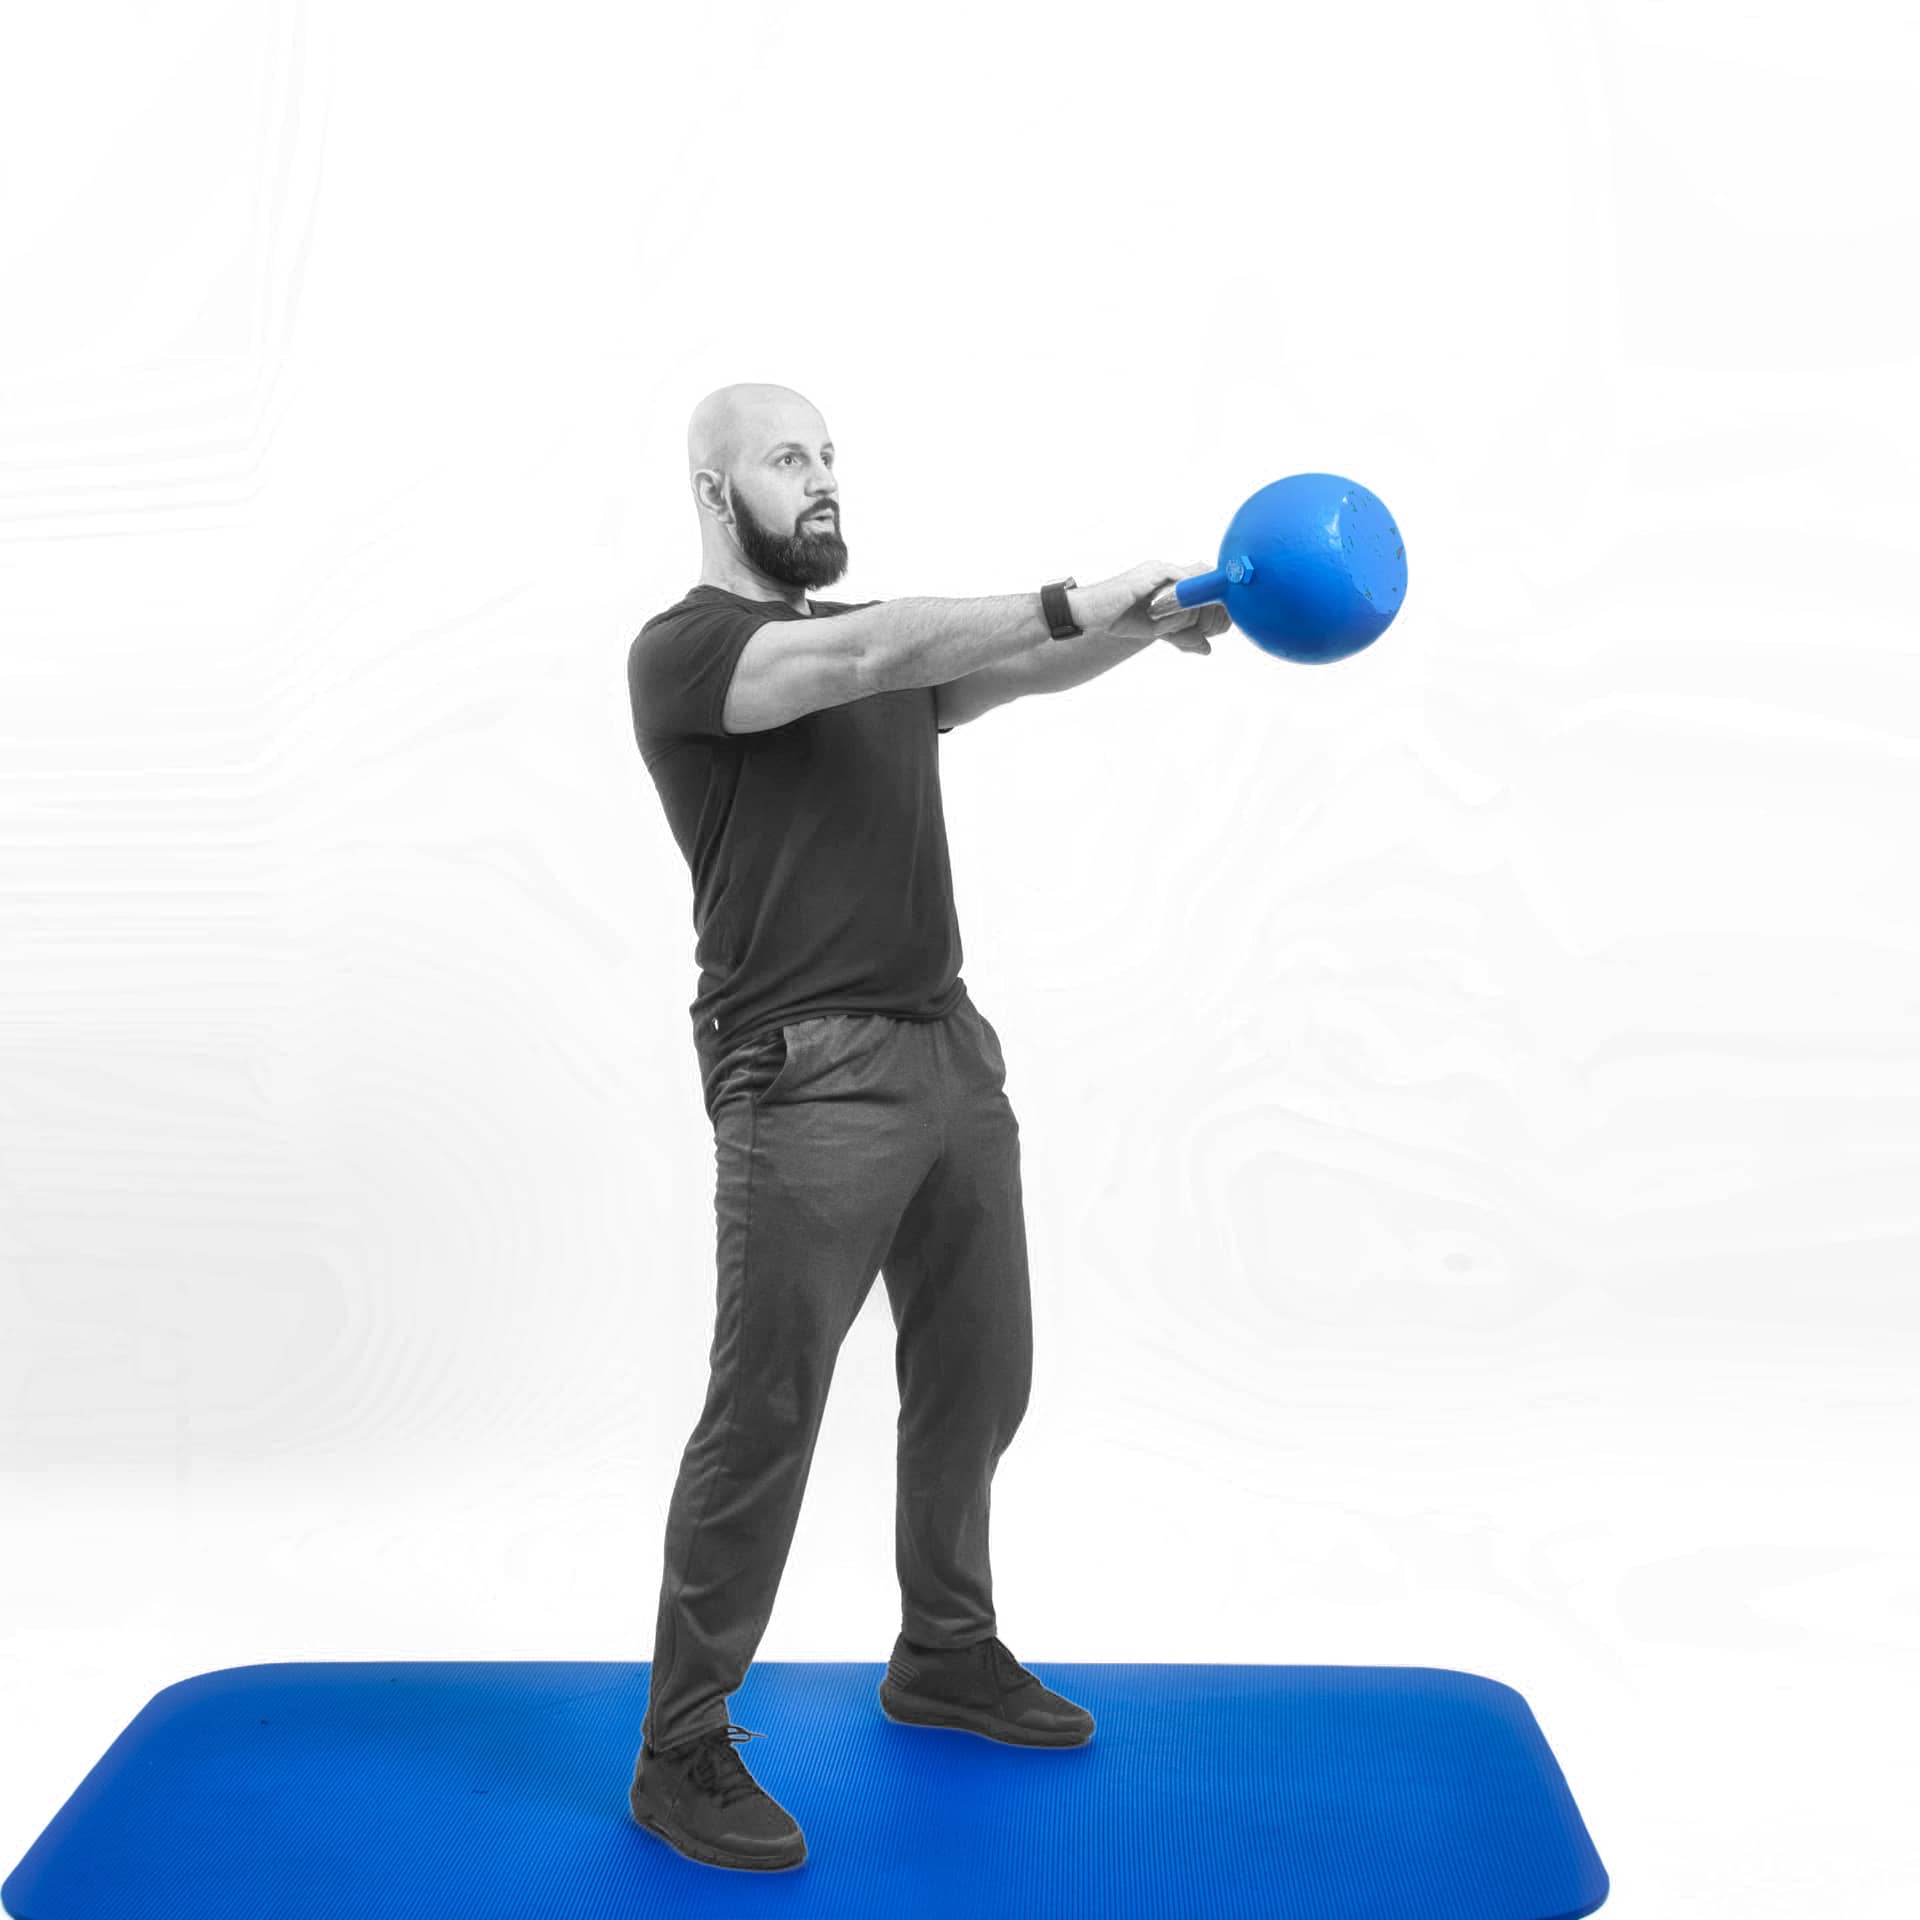 Kettlebell Training 1 - Tayfun Your Personal Trainer